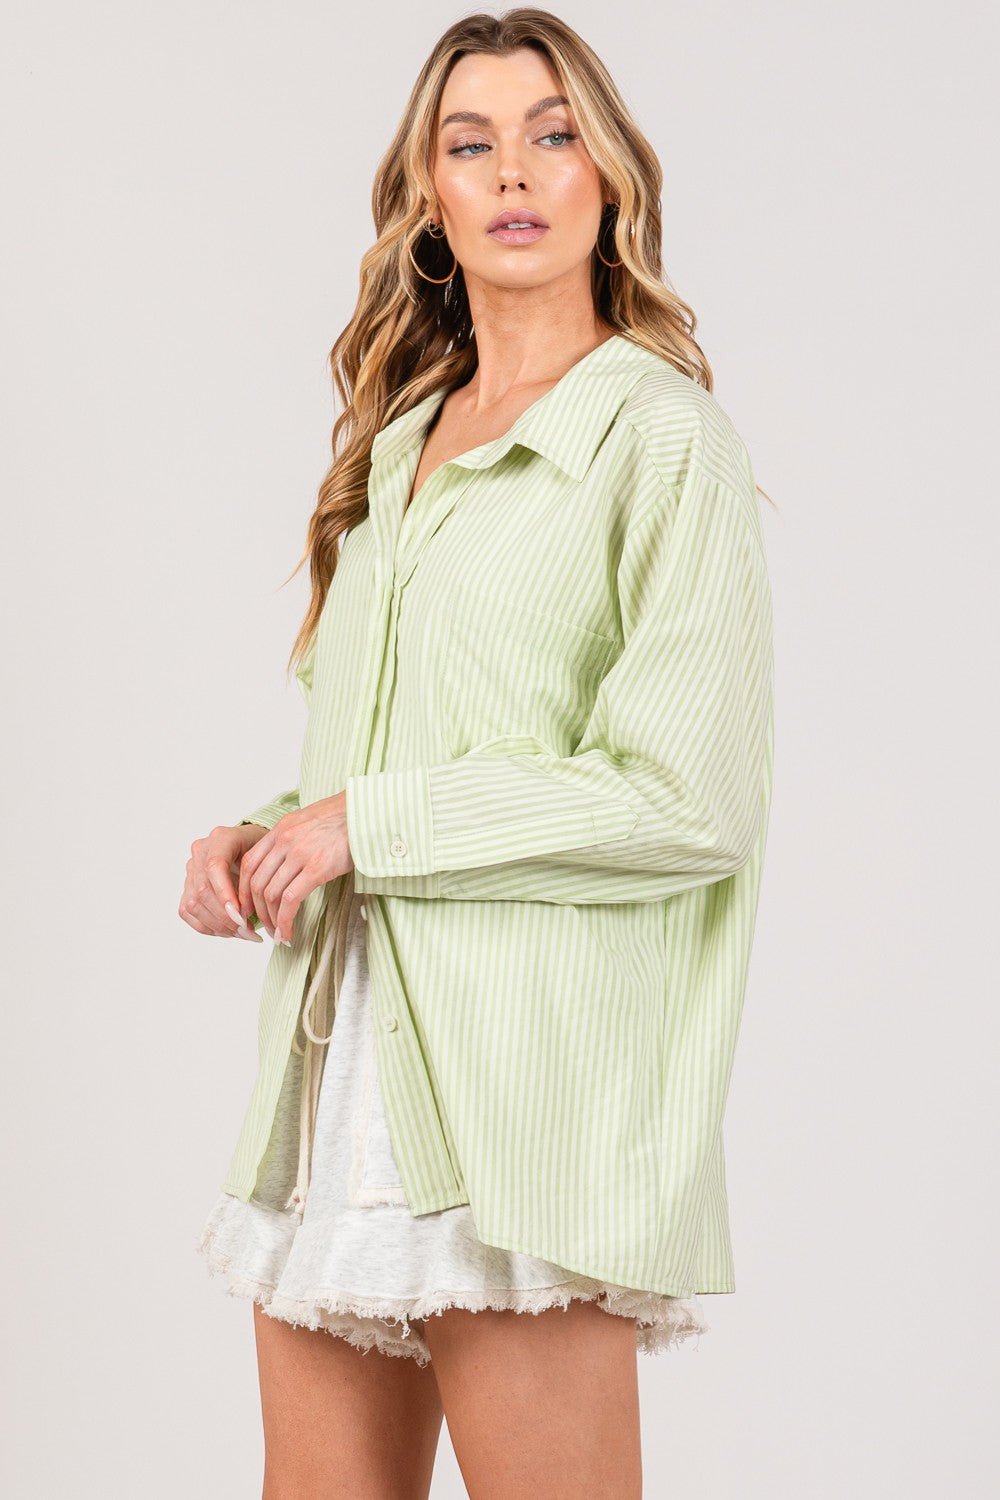 Striped Button Up Long Sleeve Shirt in SageShirtSAGE+FIG